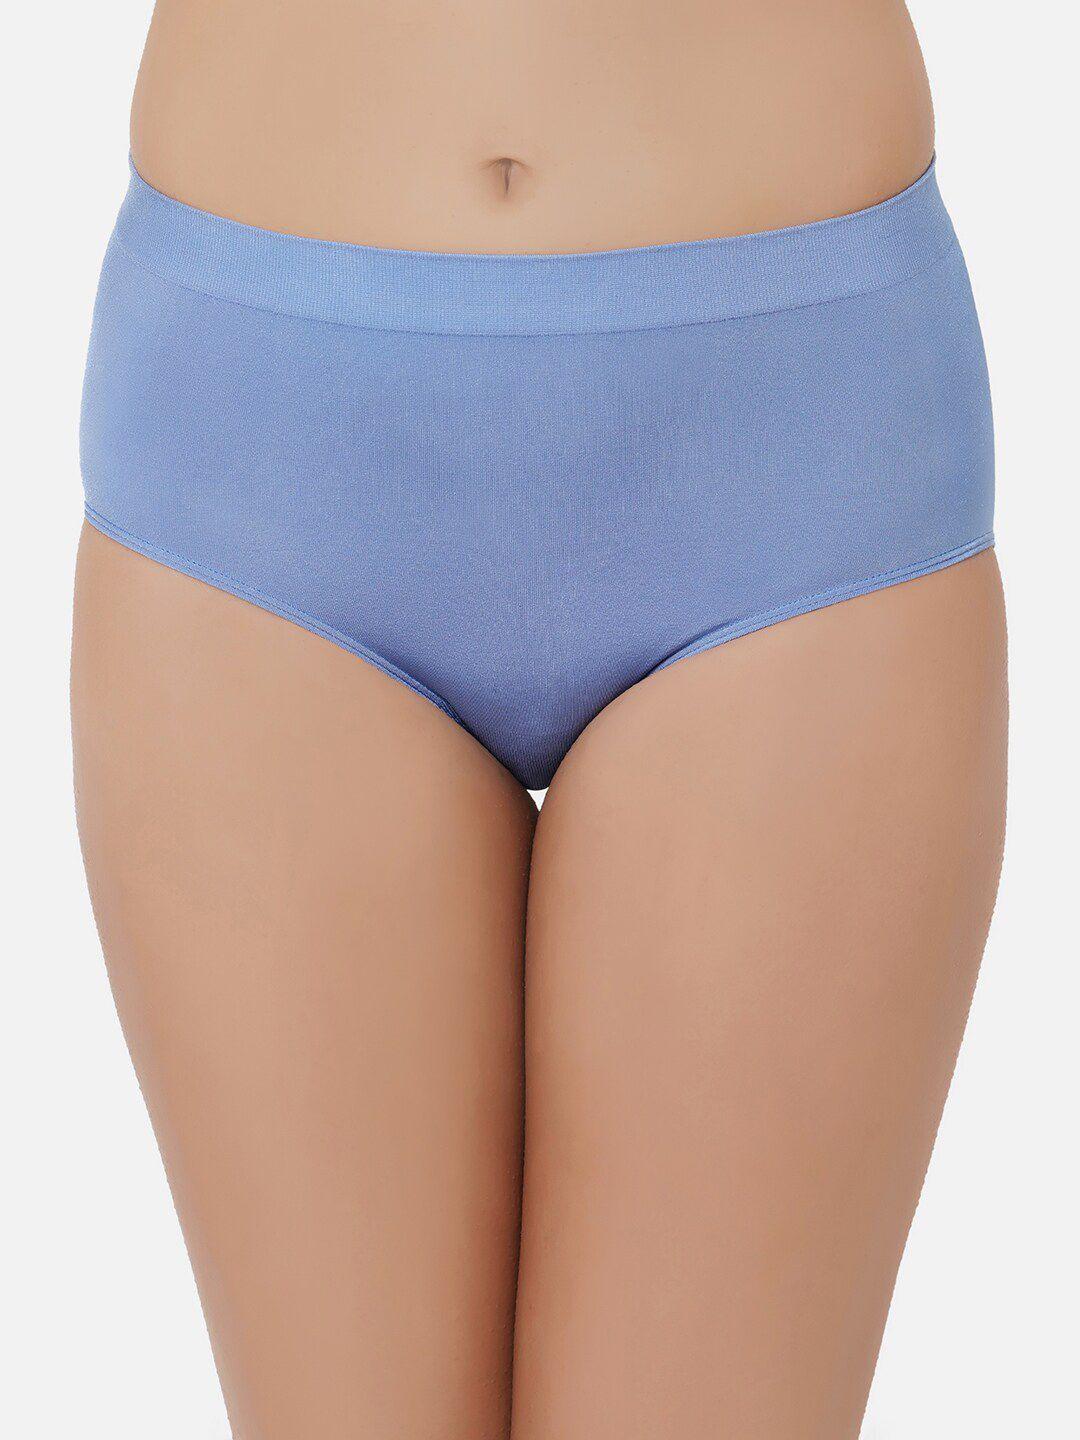 wacoal-women-blue-solid-hipster-panty-838175-486